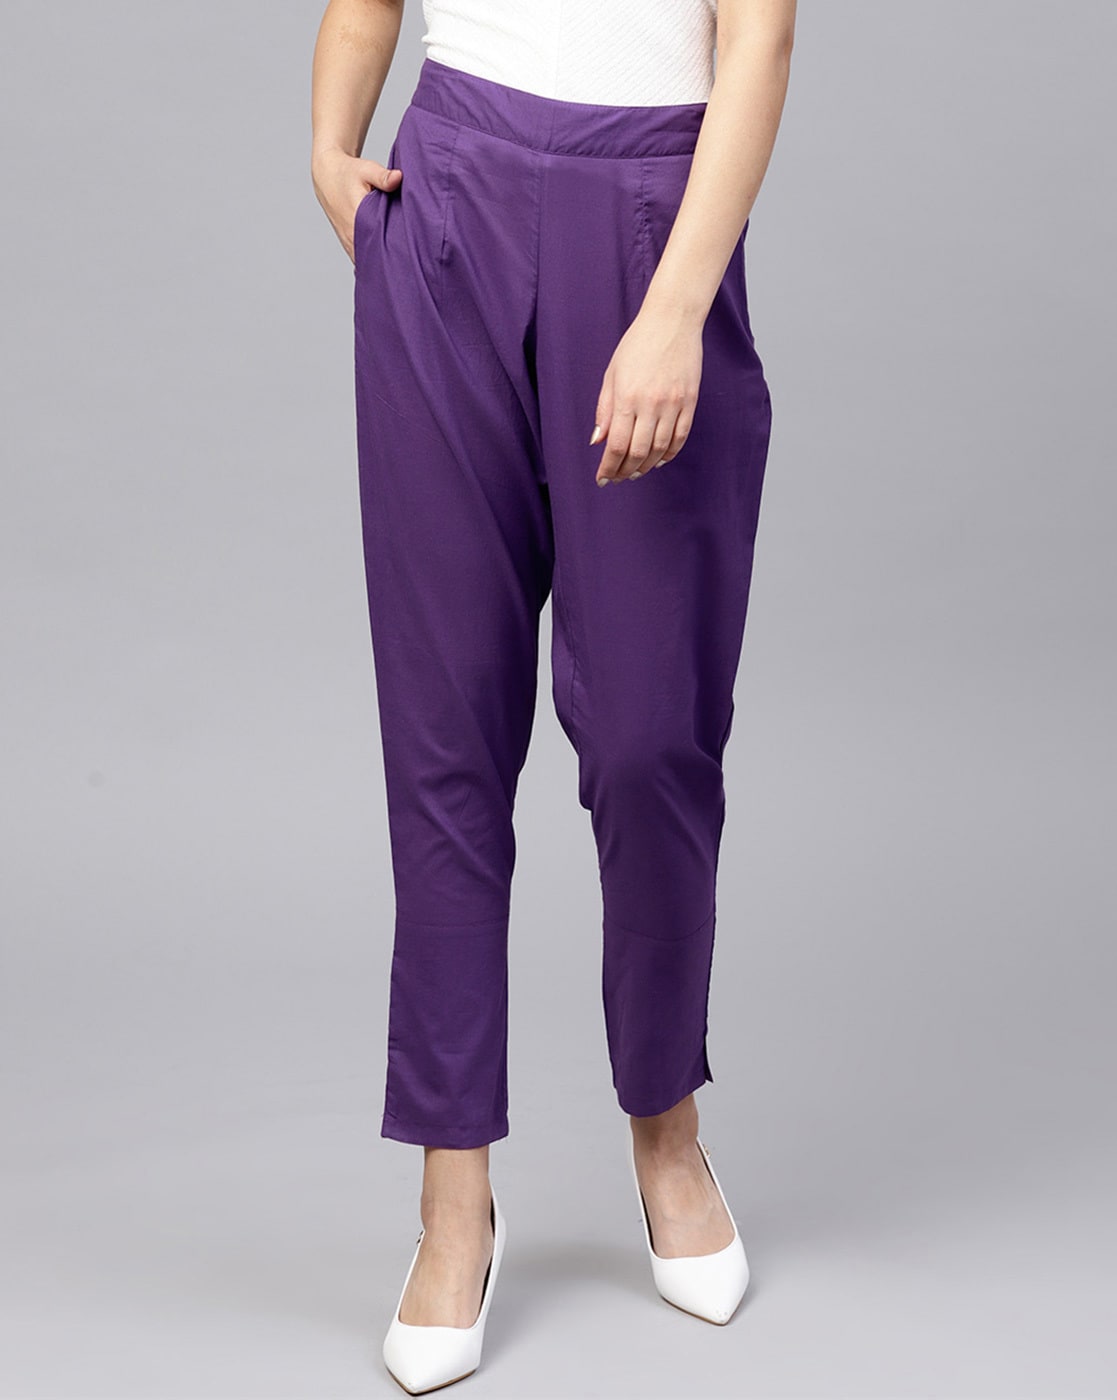 Women Lavender Rib ACTIVE Crop Top With Bootleg Pants